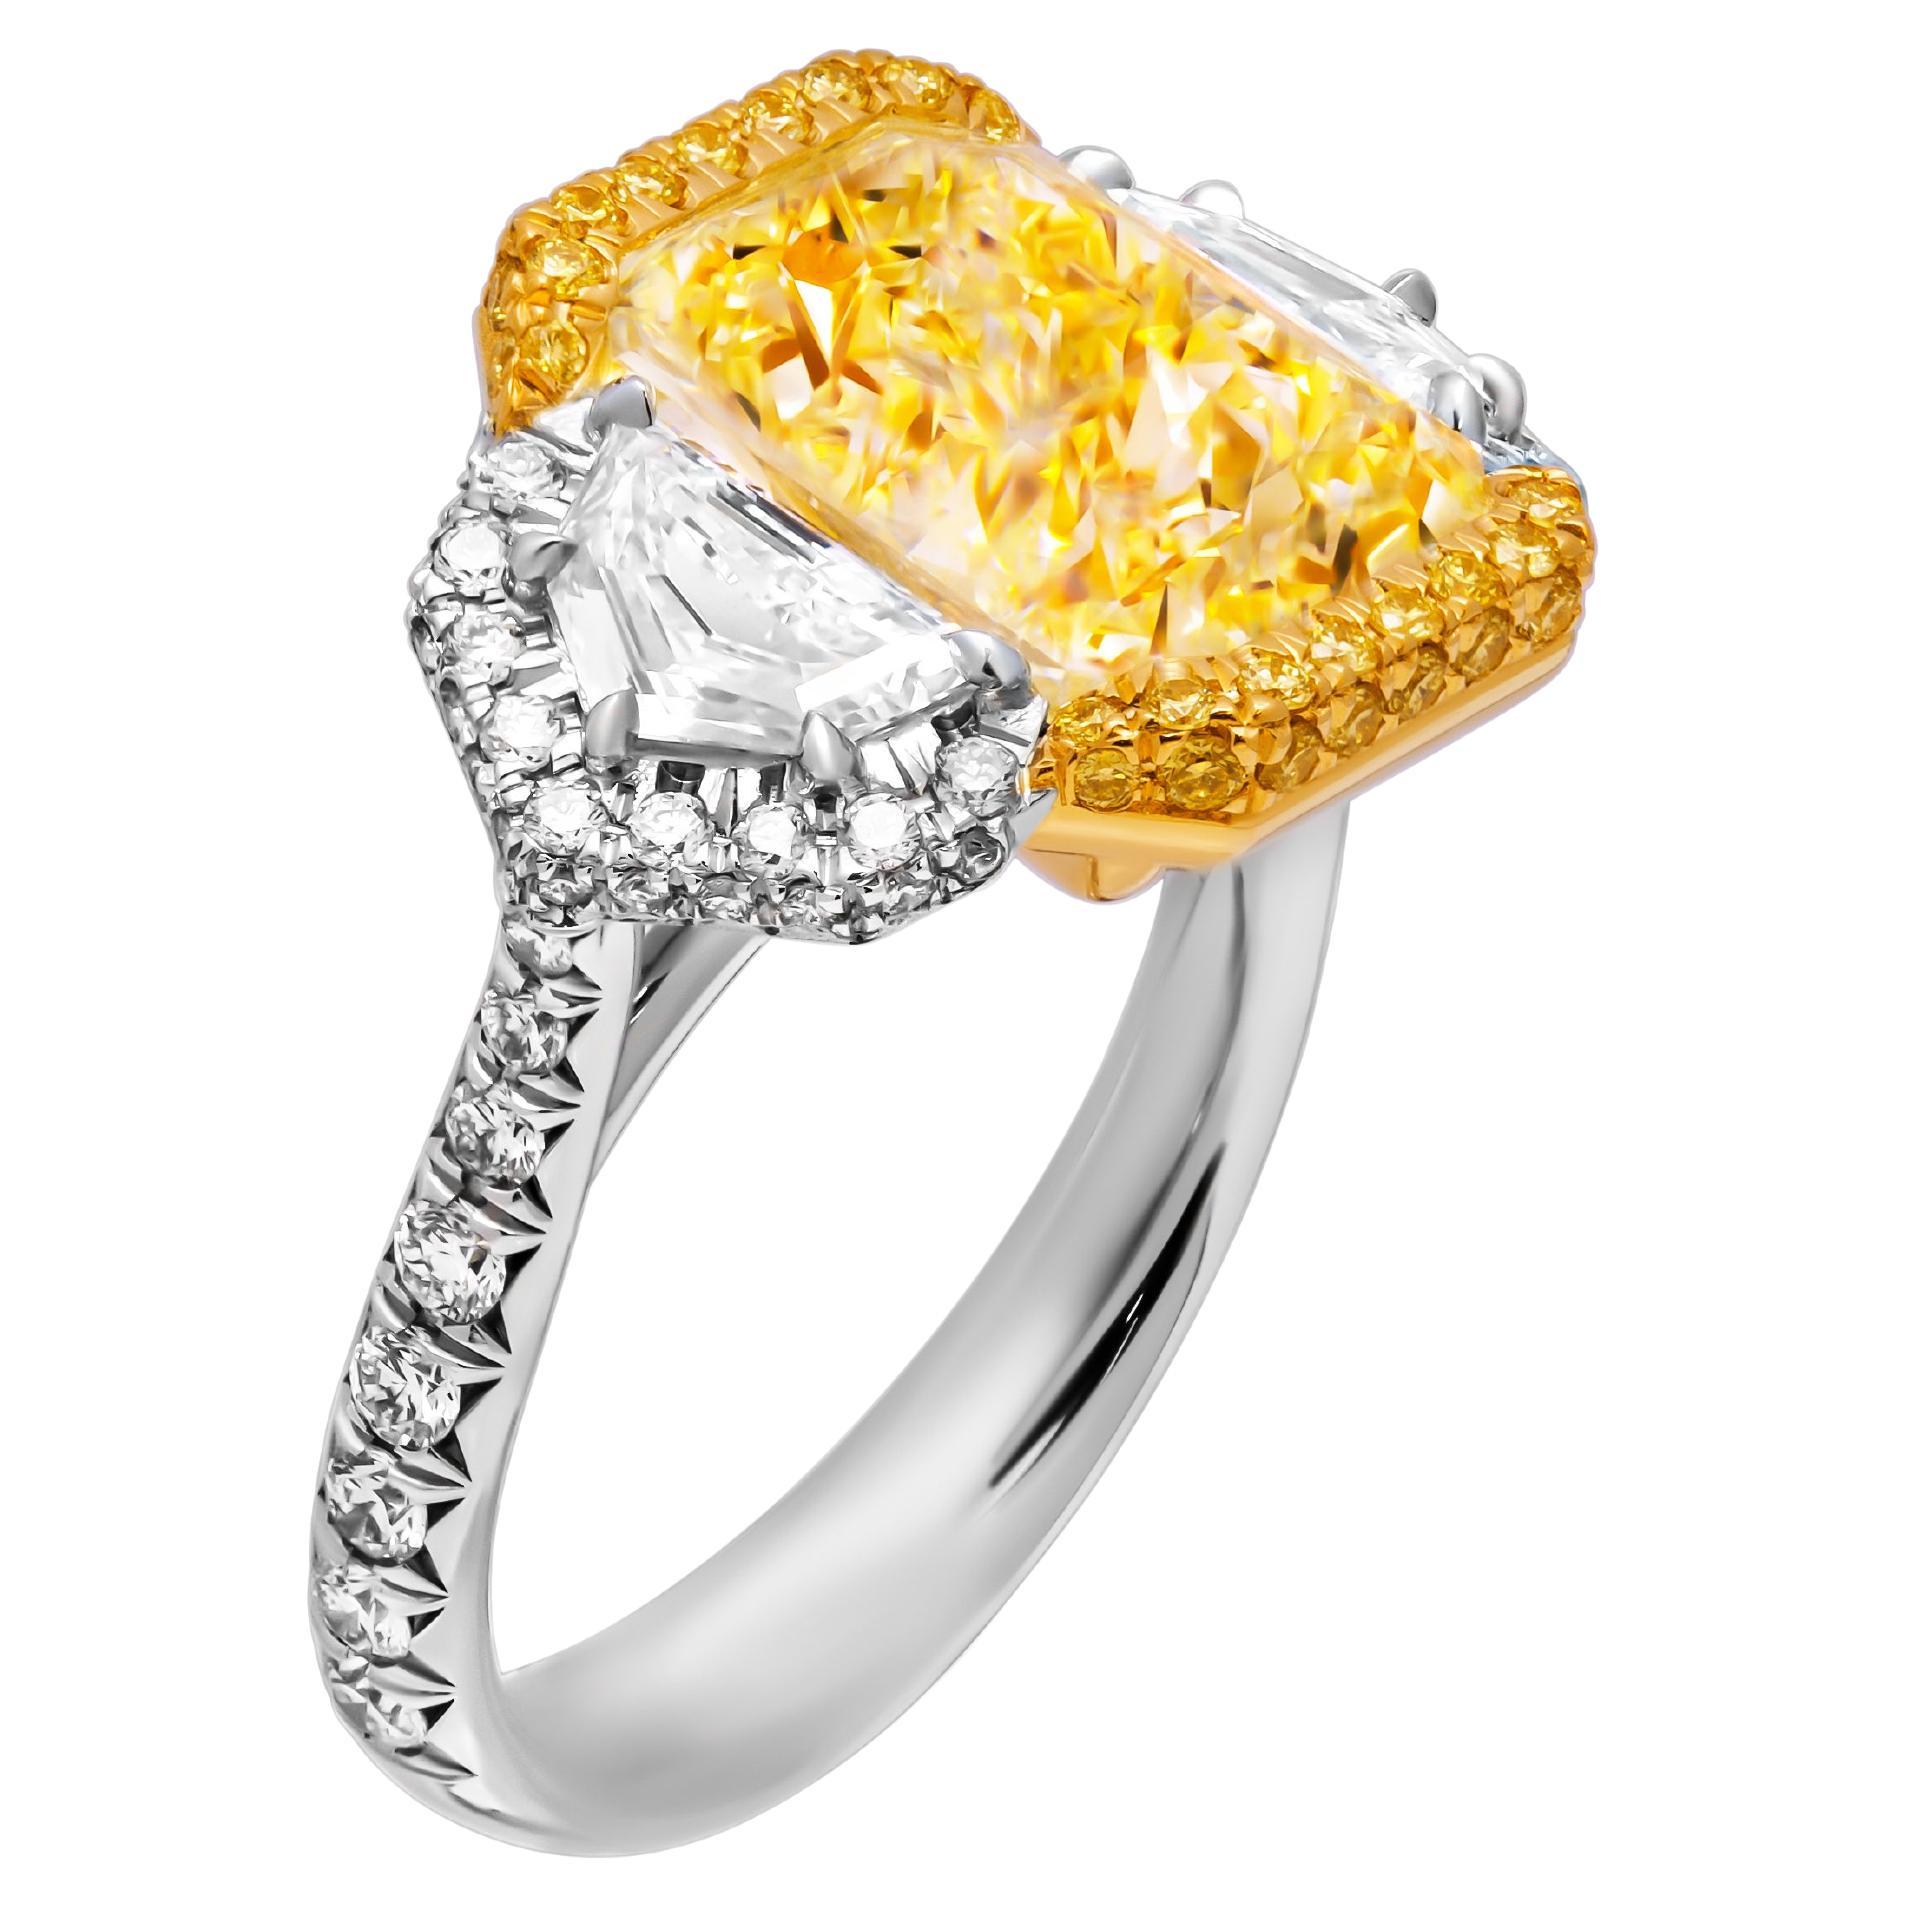 GIA Certified 3 stone ring with 7.06ct Fancy Light Yellow Radiant Cut Diamond For Sale